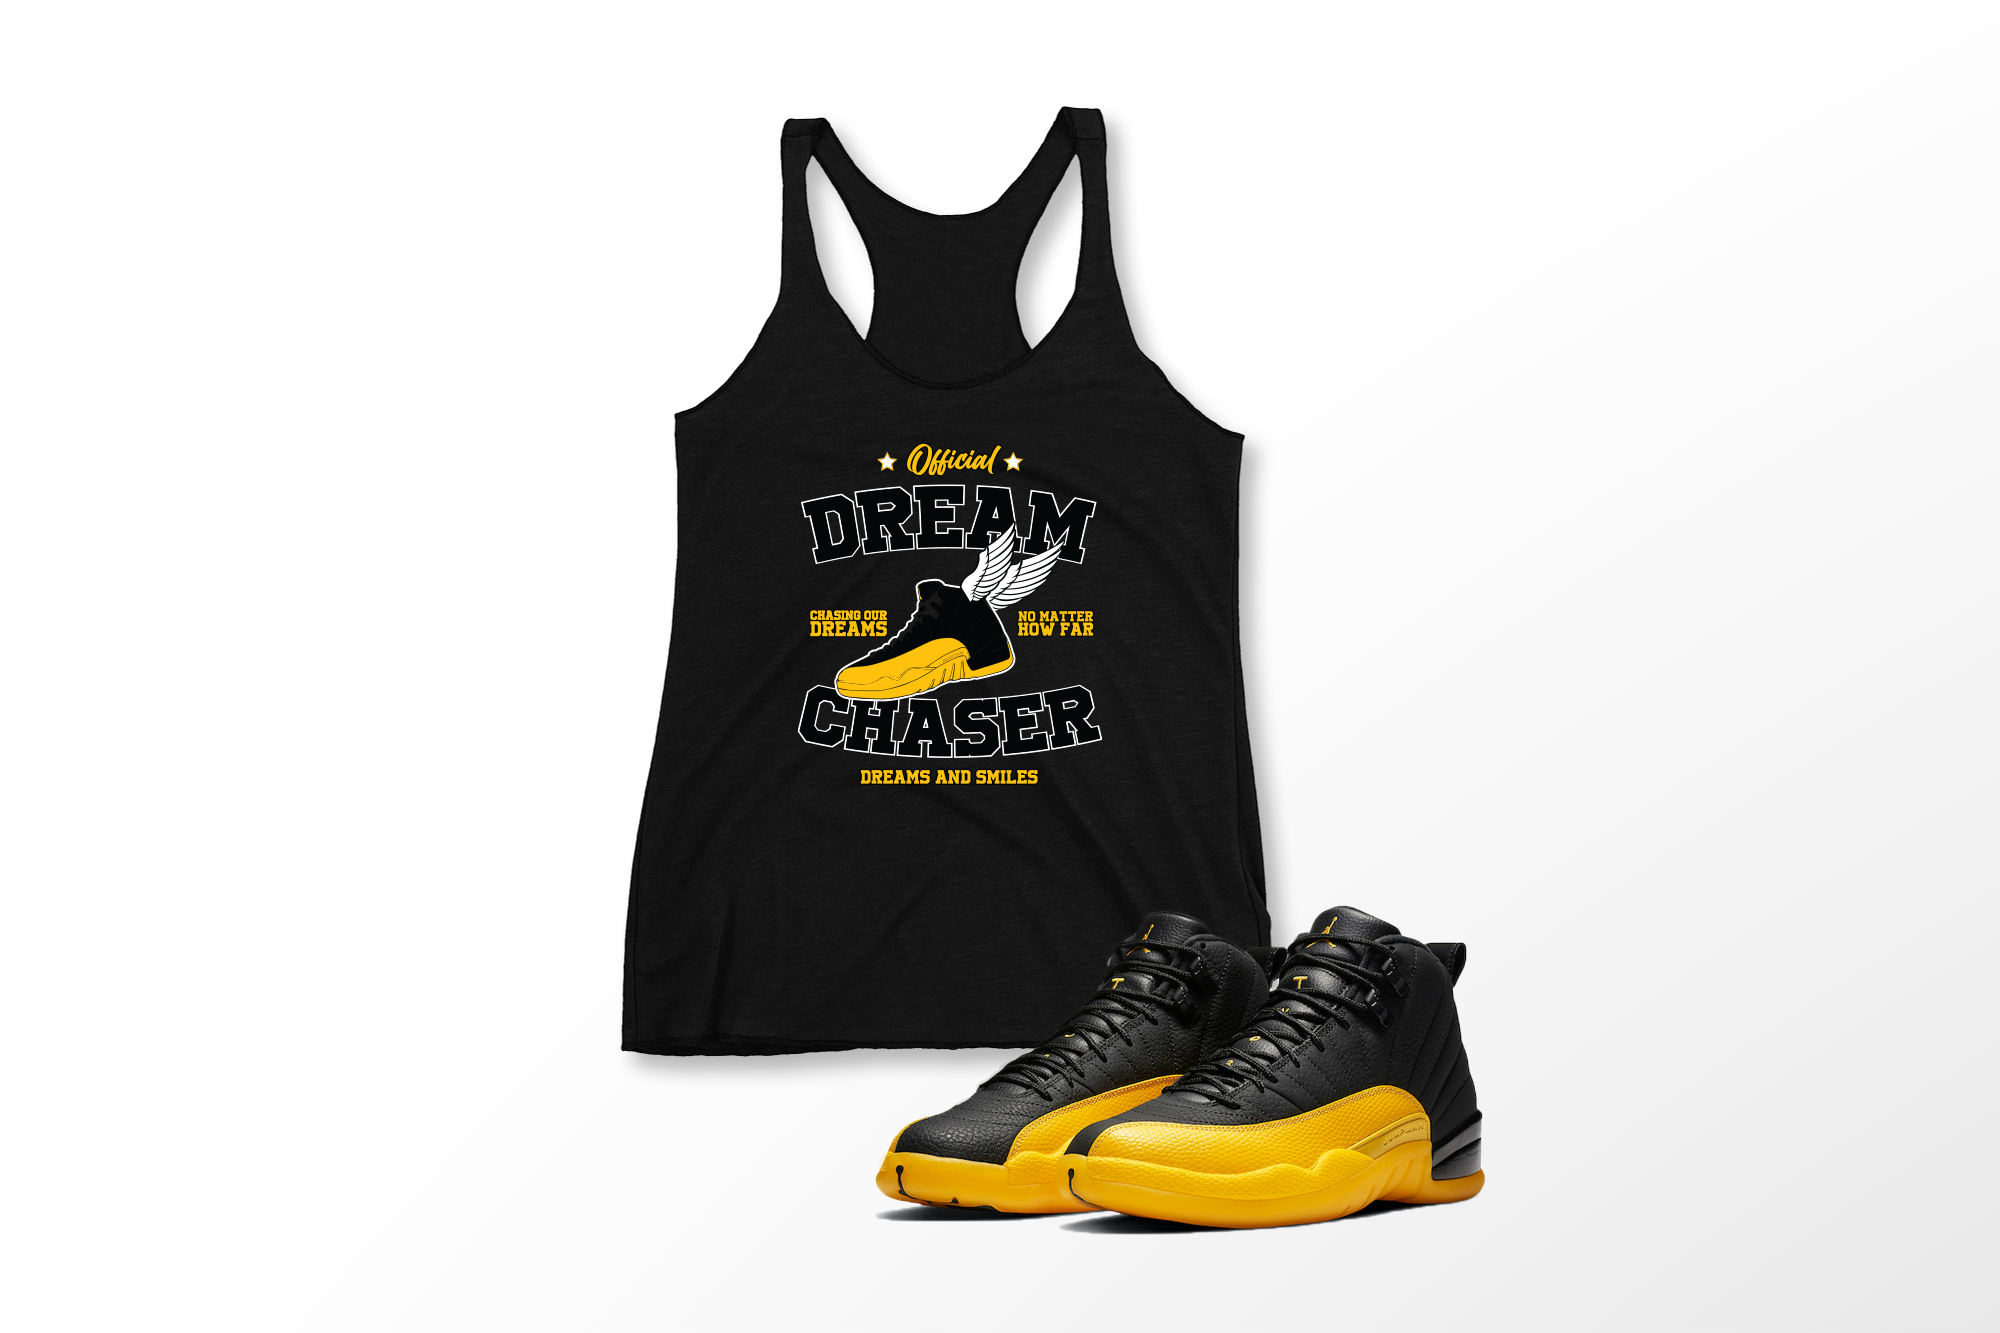 'Official Dream Chaser' in University Gold CW Women's Racerback Tank